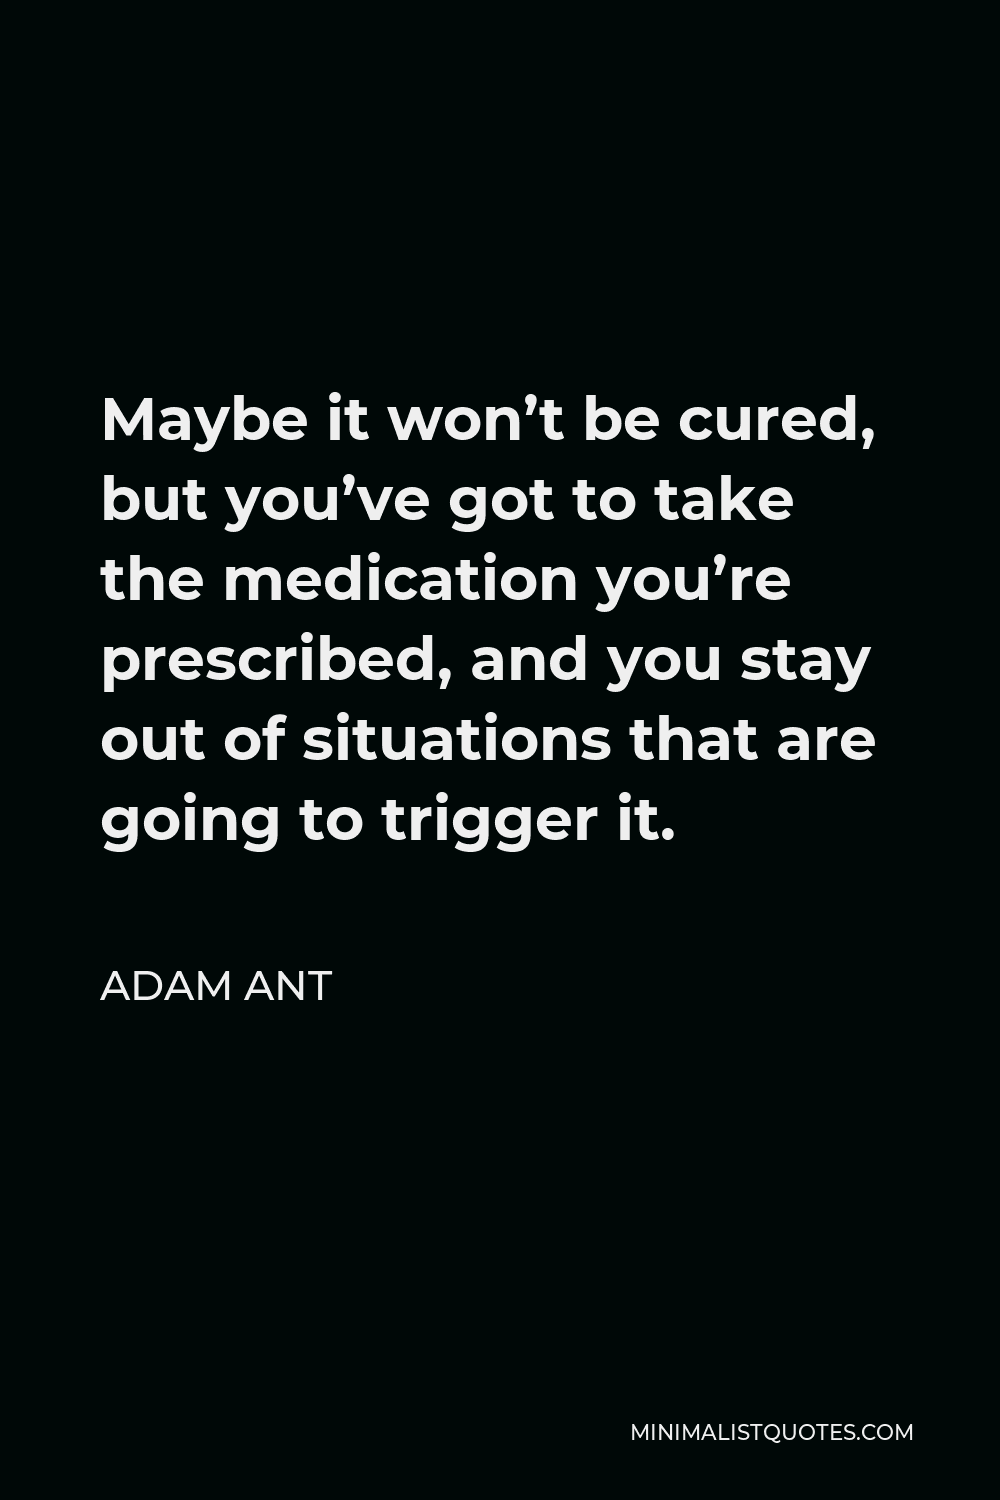 Adam Ant Quote - Maybe it won’t be cured, but you’ve got to take the medication you’re prescribed, and you stay out of situations that are going to trigger it.